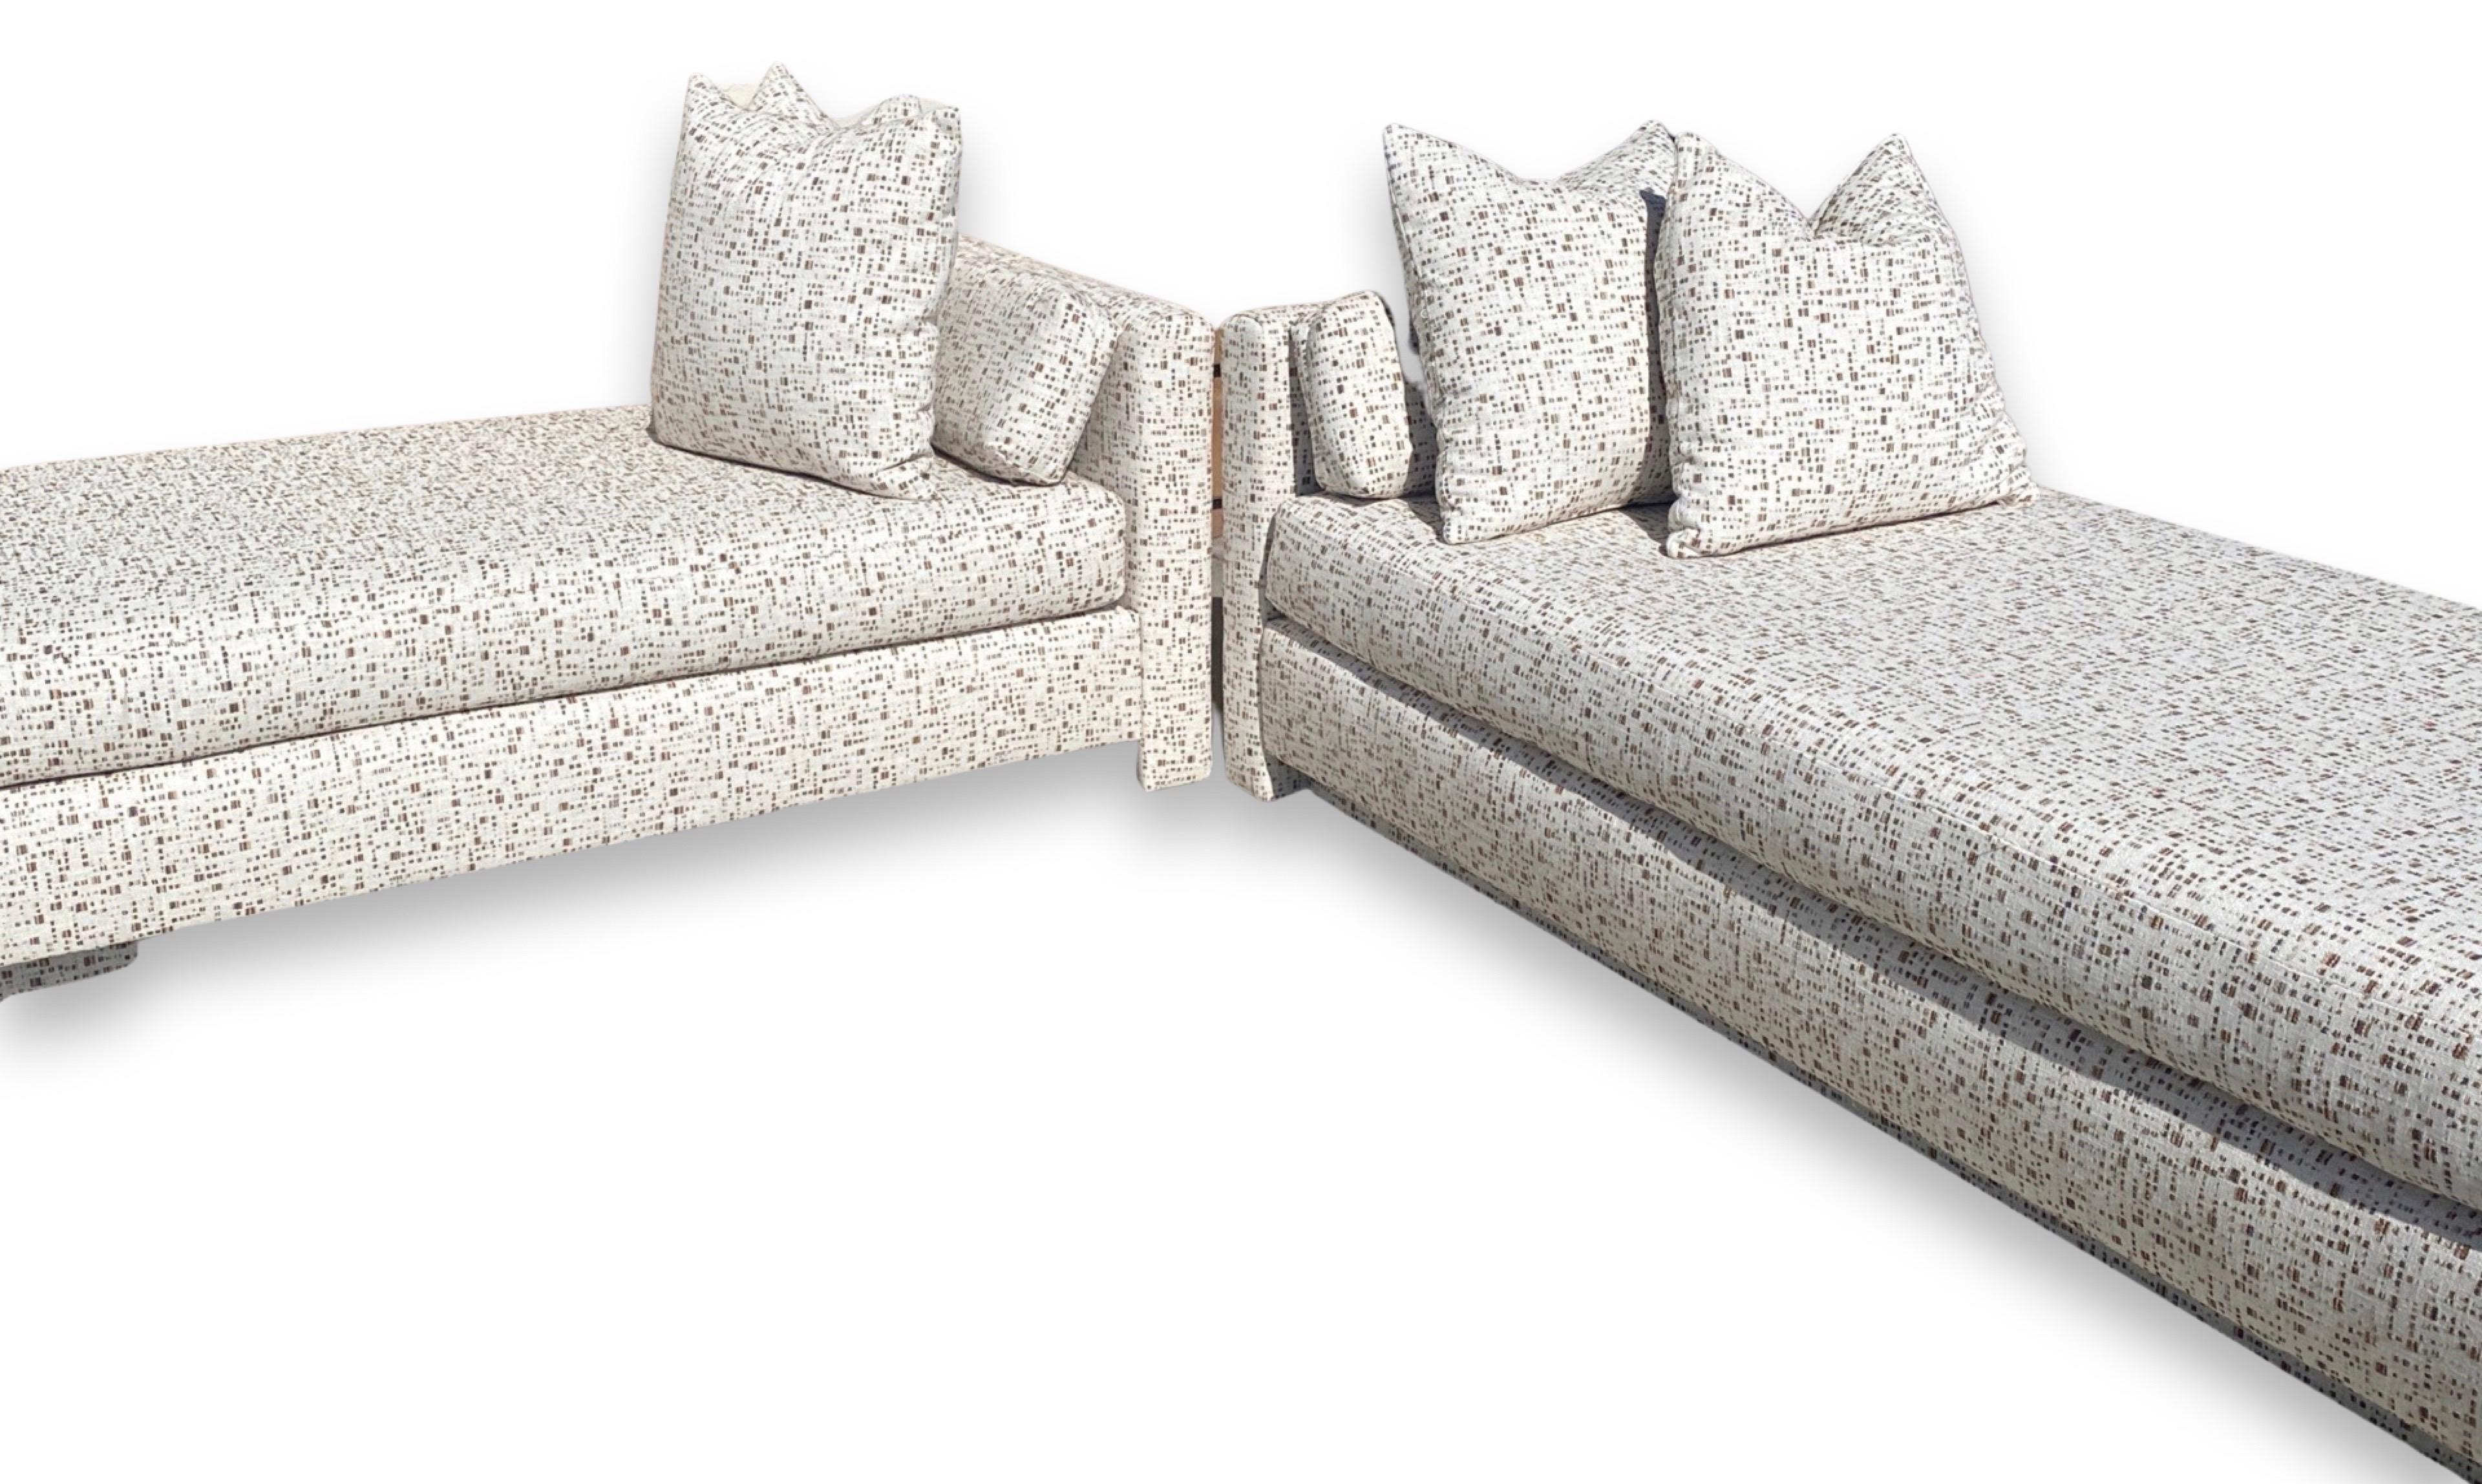 Sofa and Chaise Set in Modern Geometric Neutral Fabric in Style of Steve Chase For Sale 2